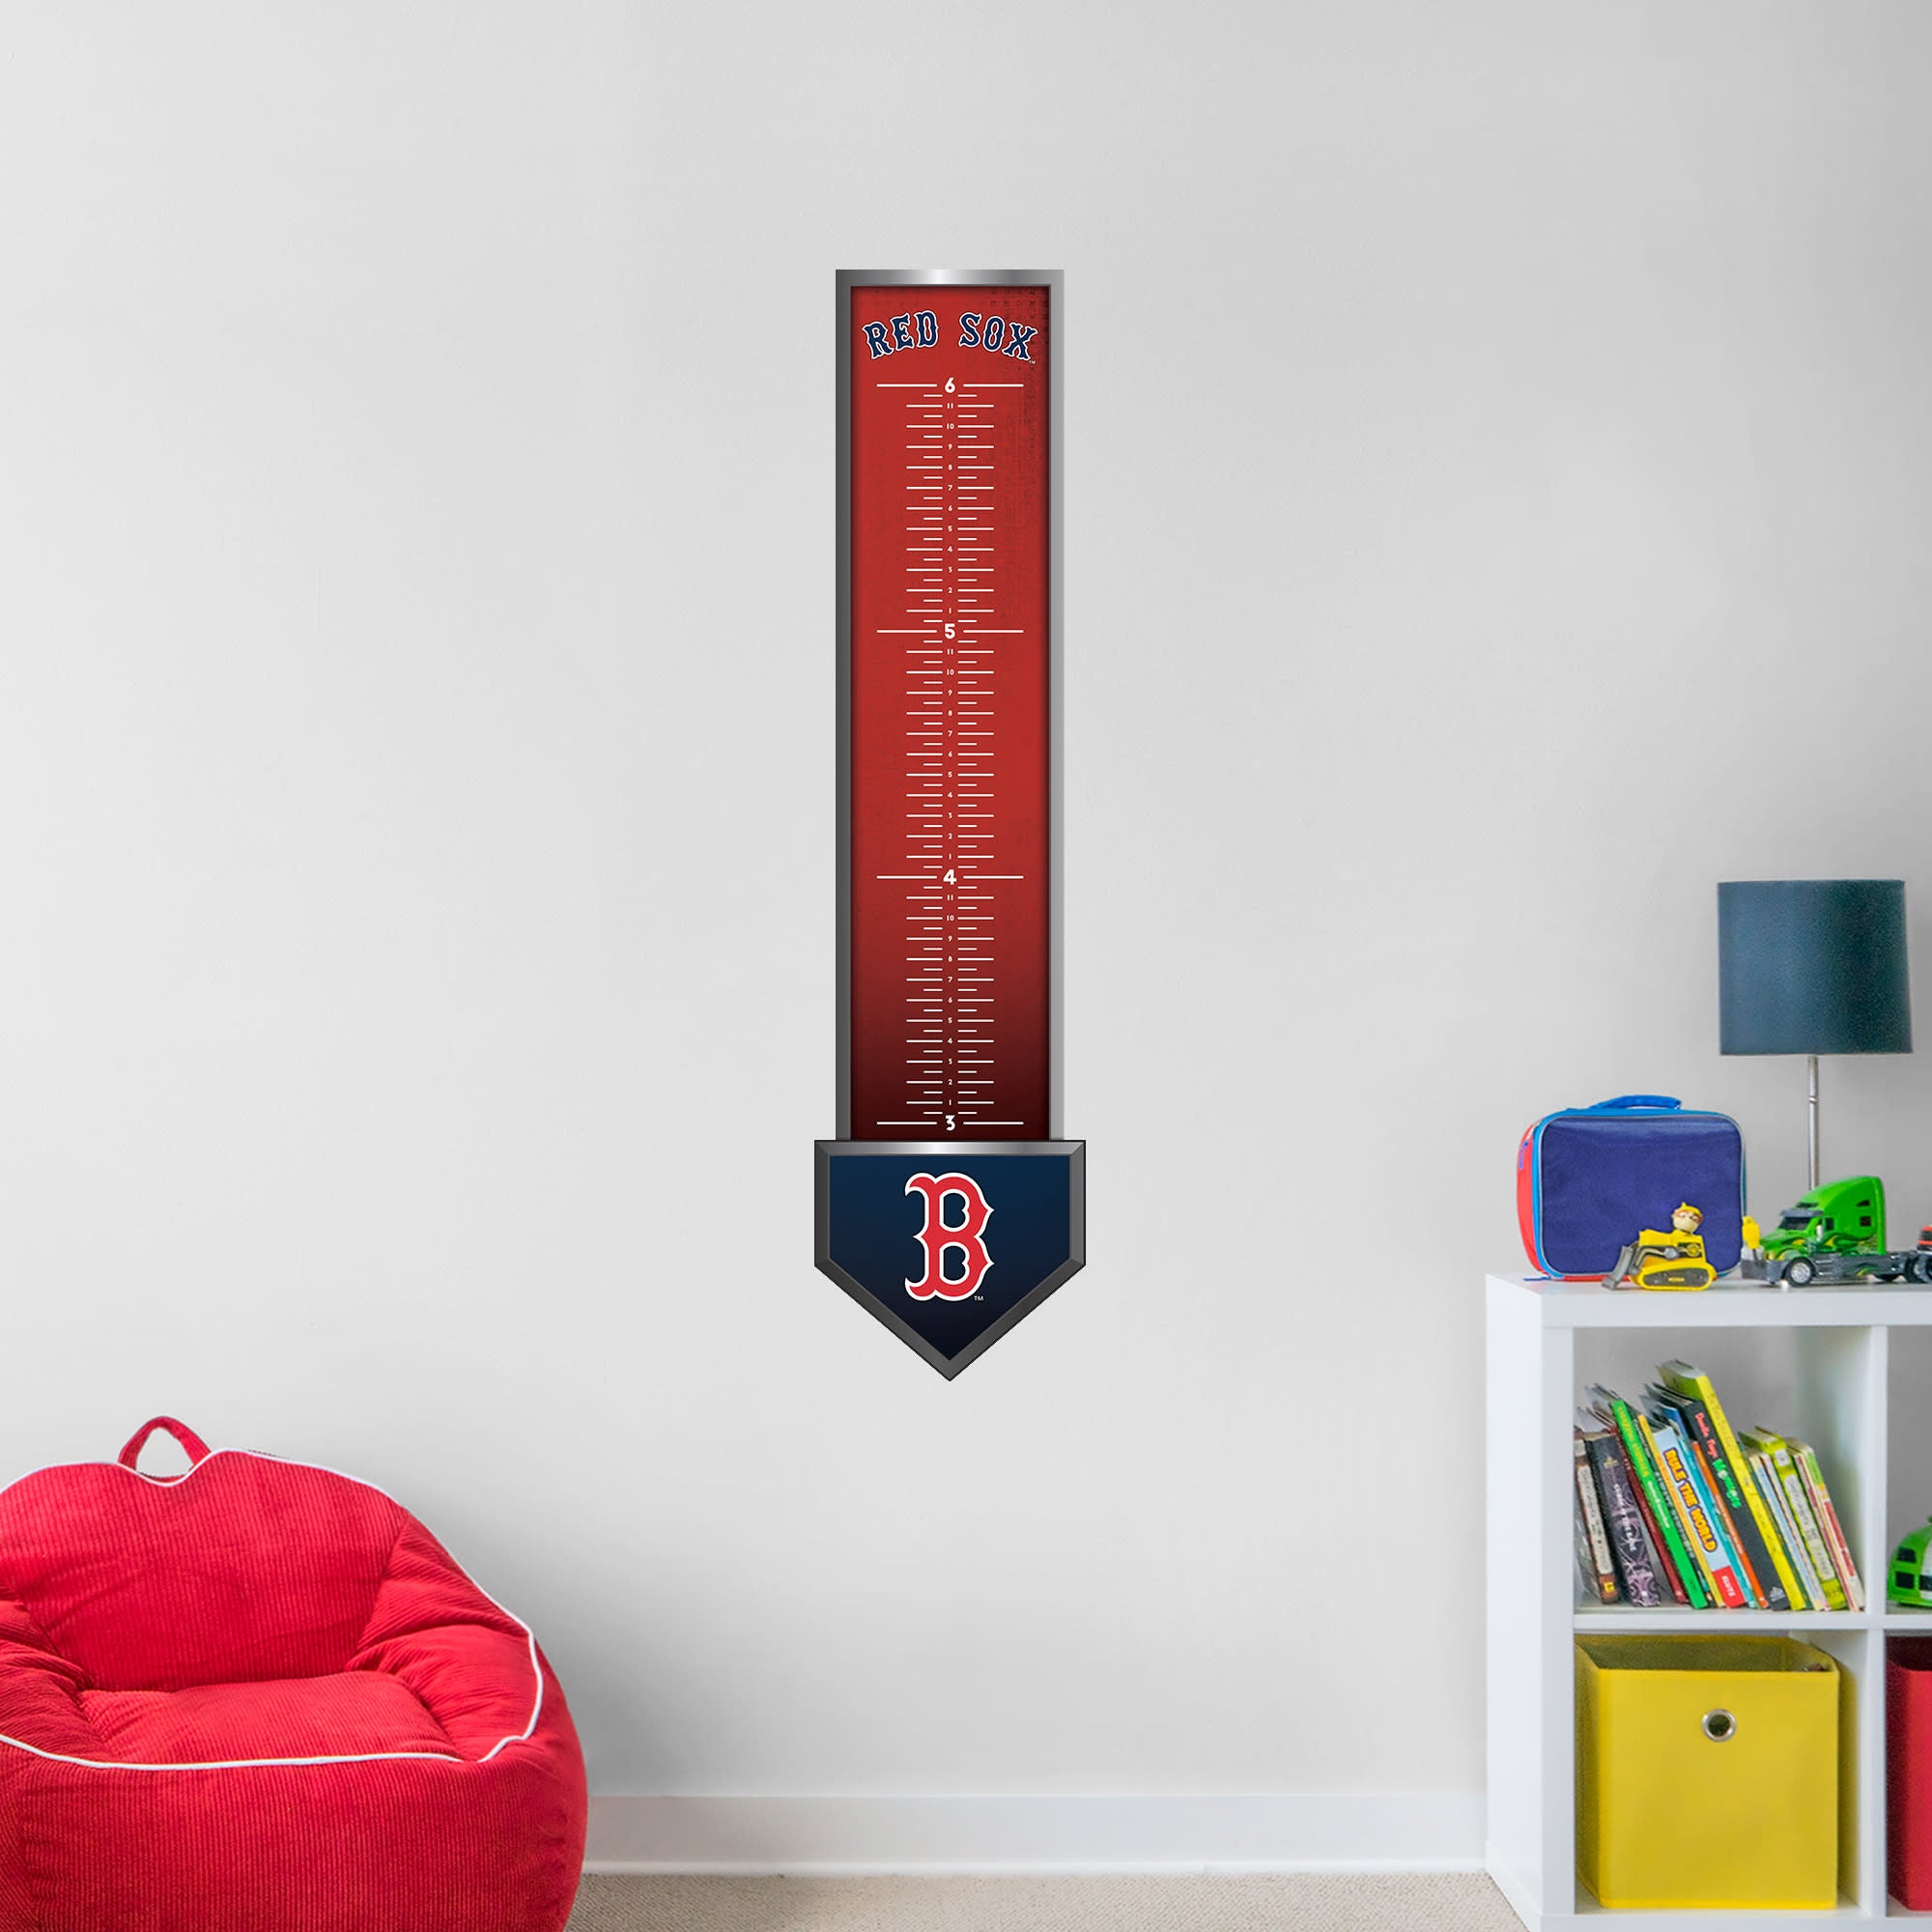 Boston Red Sox: Growth Chart - Officially Licensed MLB Removable Wall Graphic 13.0"W x 54.0"H by Fathead | Vinyl